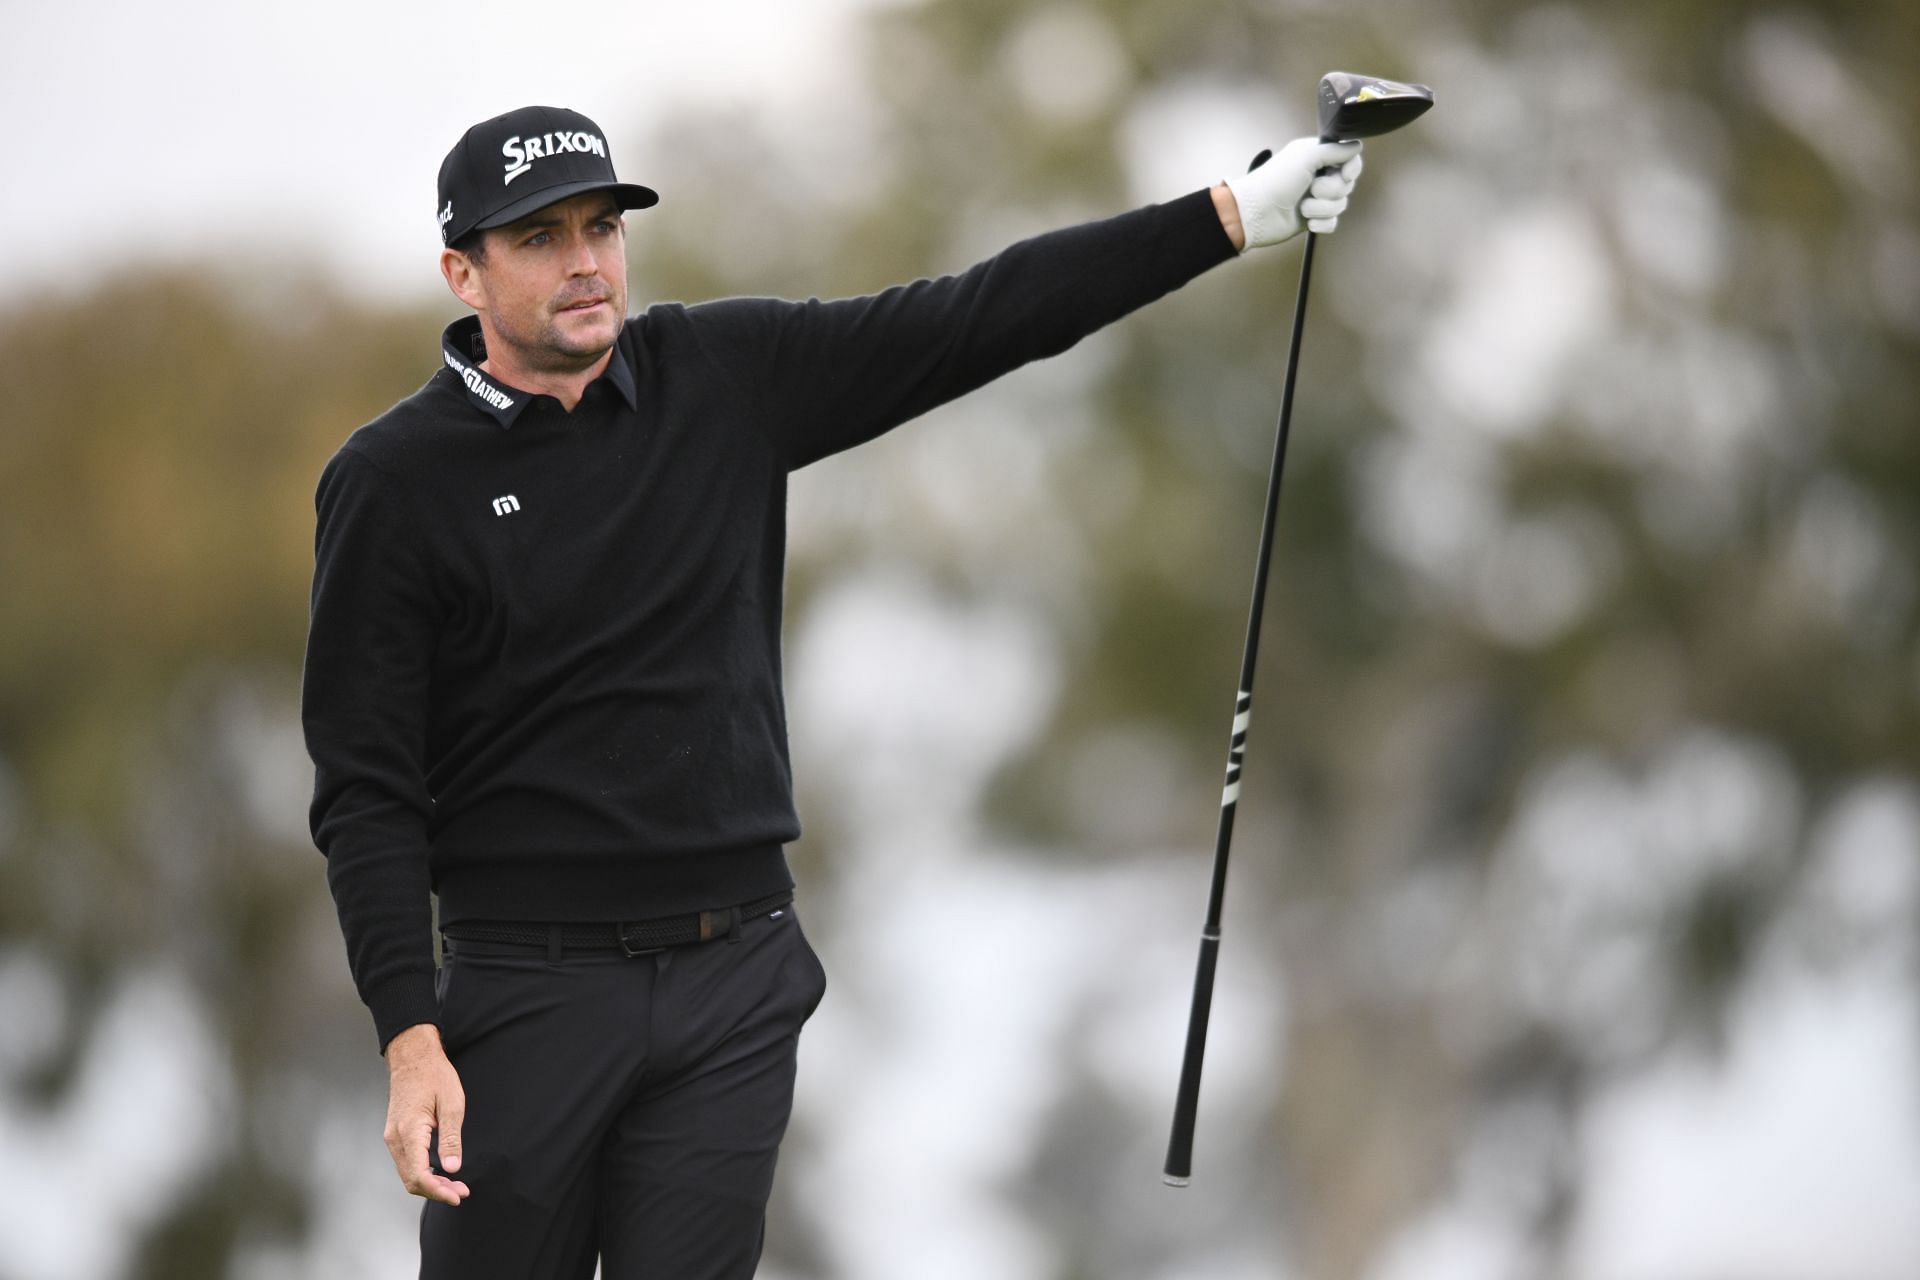 Keegan Bradley finished runner-up last year at the Farmers Insurance Open